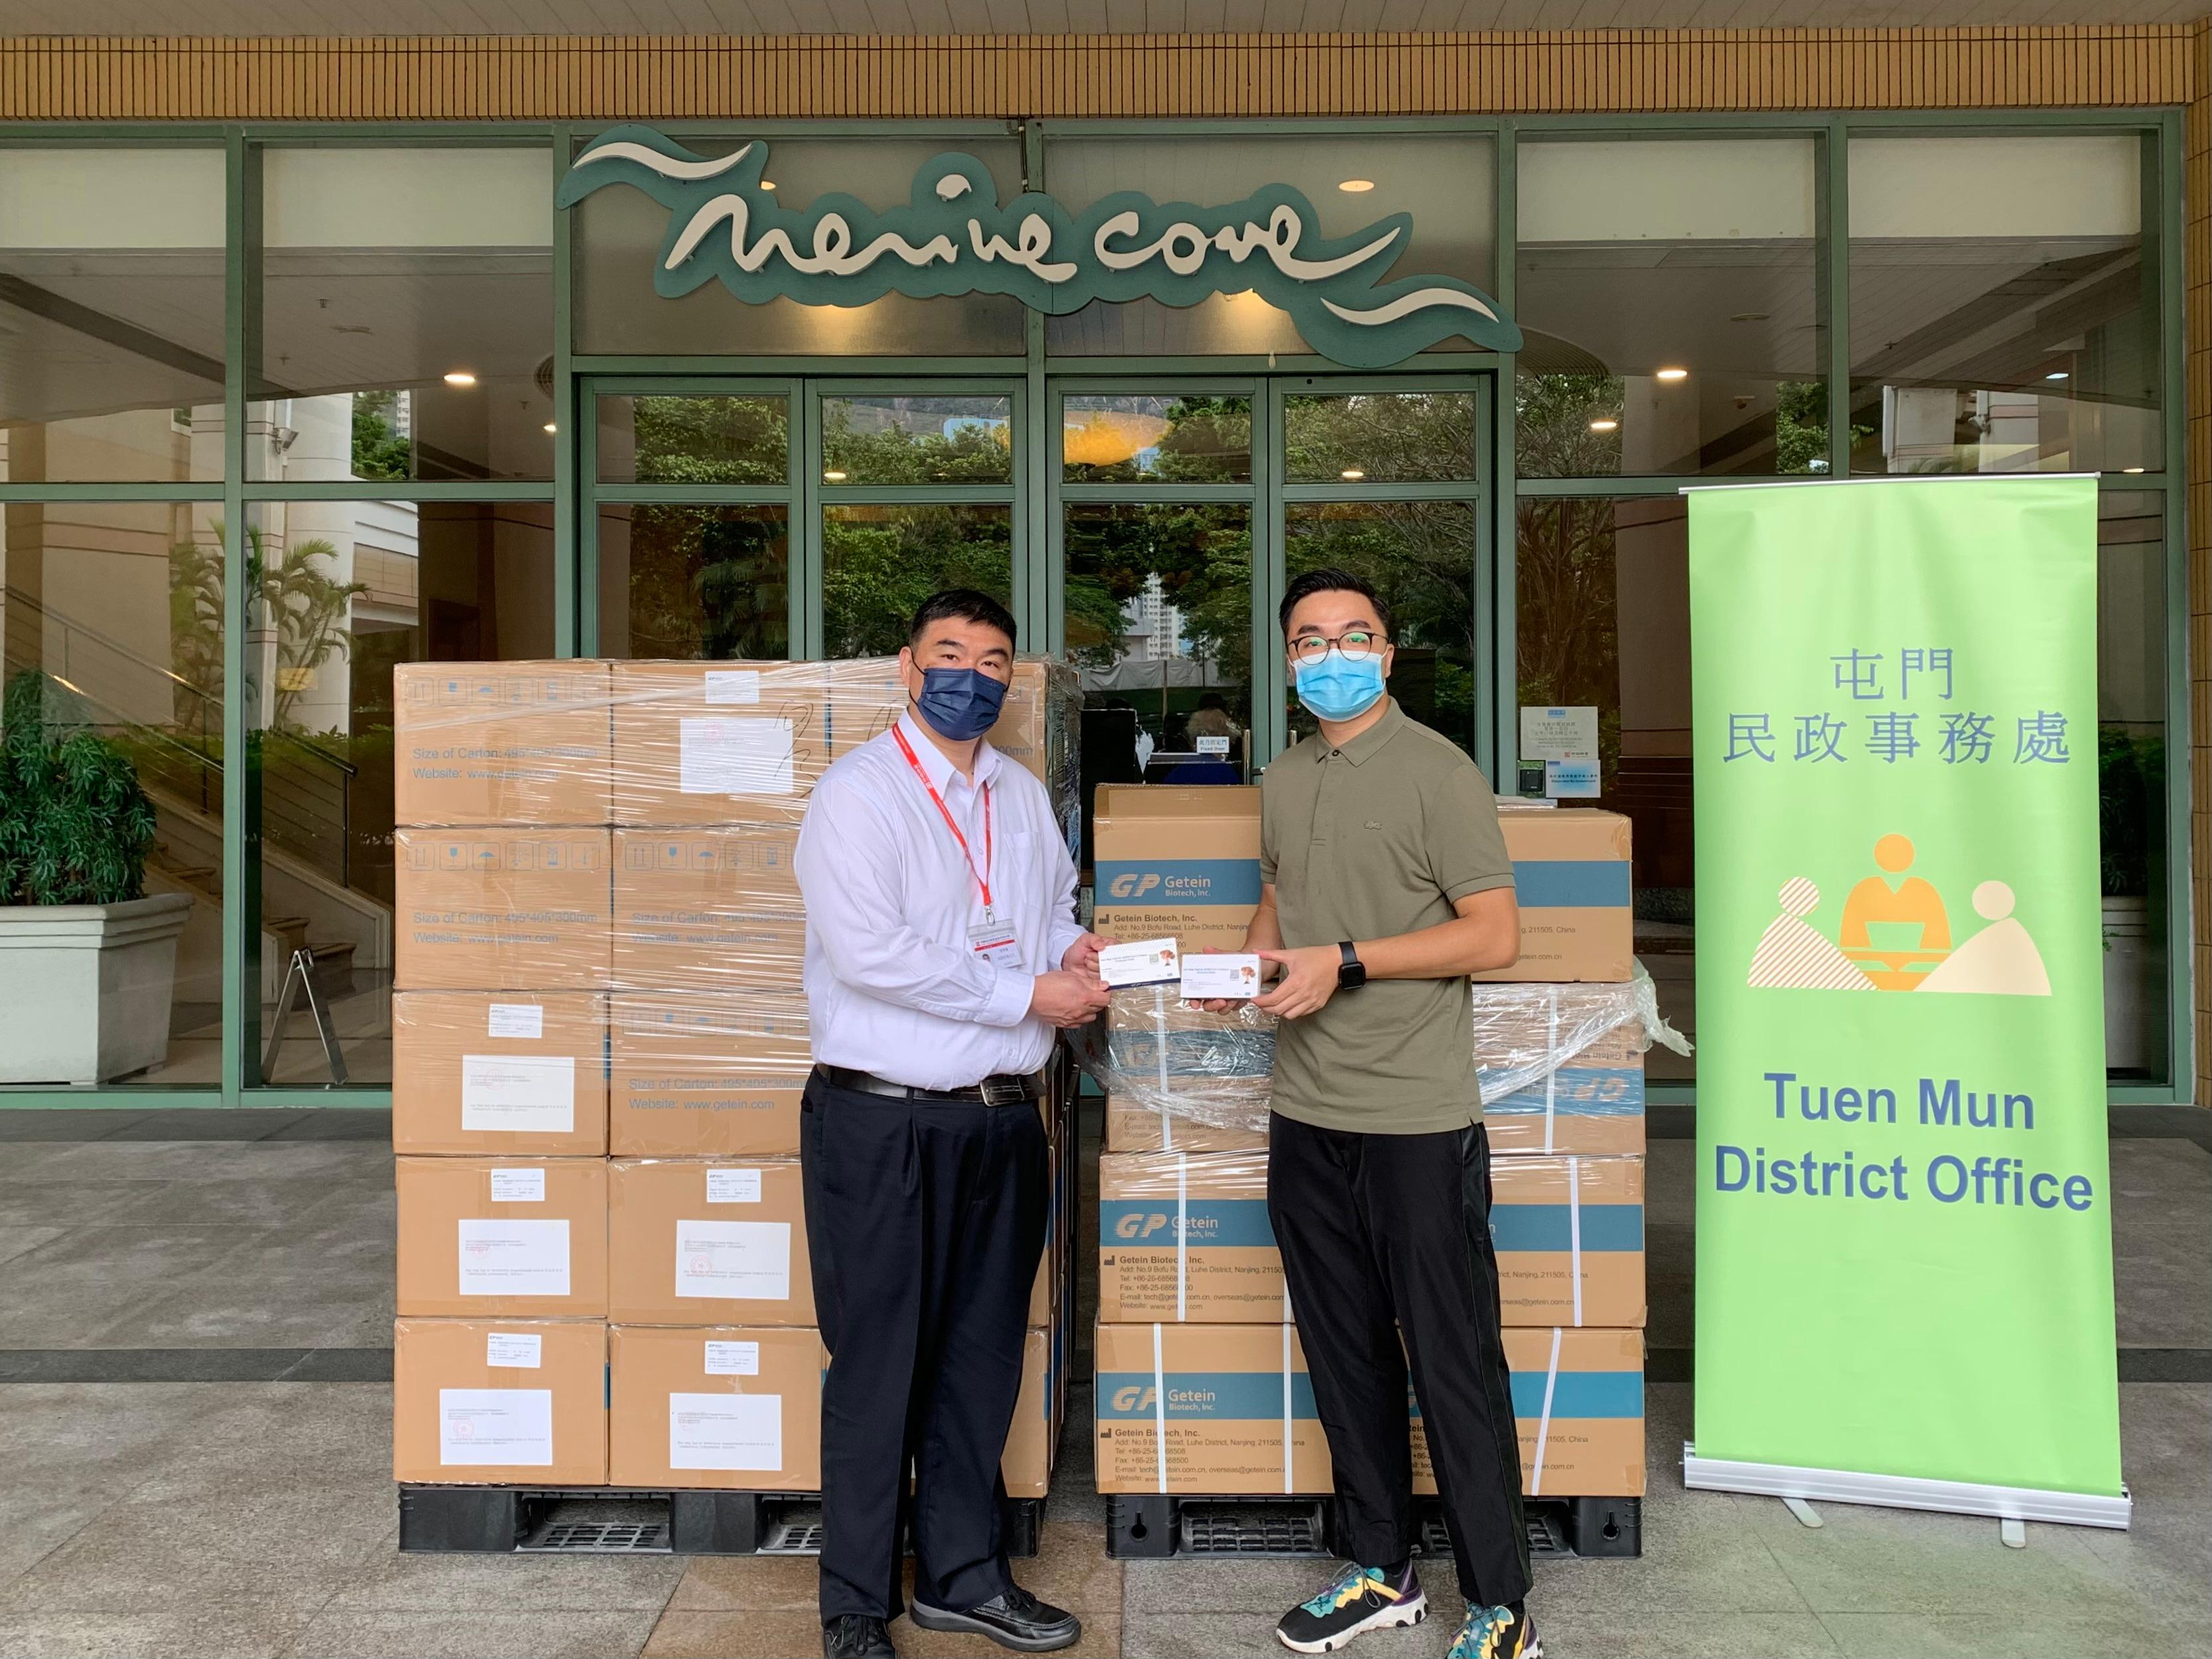 The Tuen Mun District Office today (June 22) distributed COVID-19 rapid test kits to households, cleansing workers and property management staff living and working in Nerine Cove for voluntary testing through the property management company.